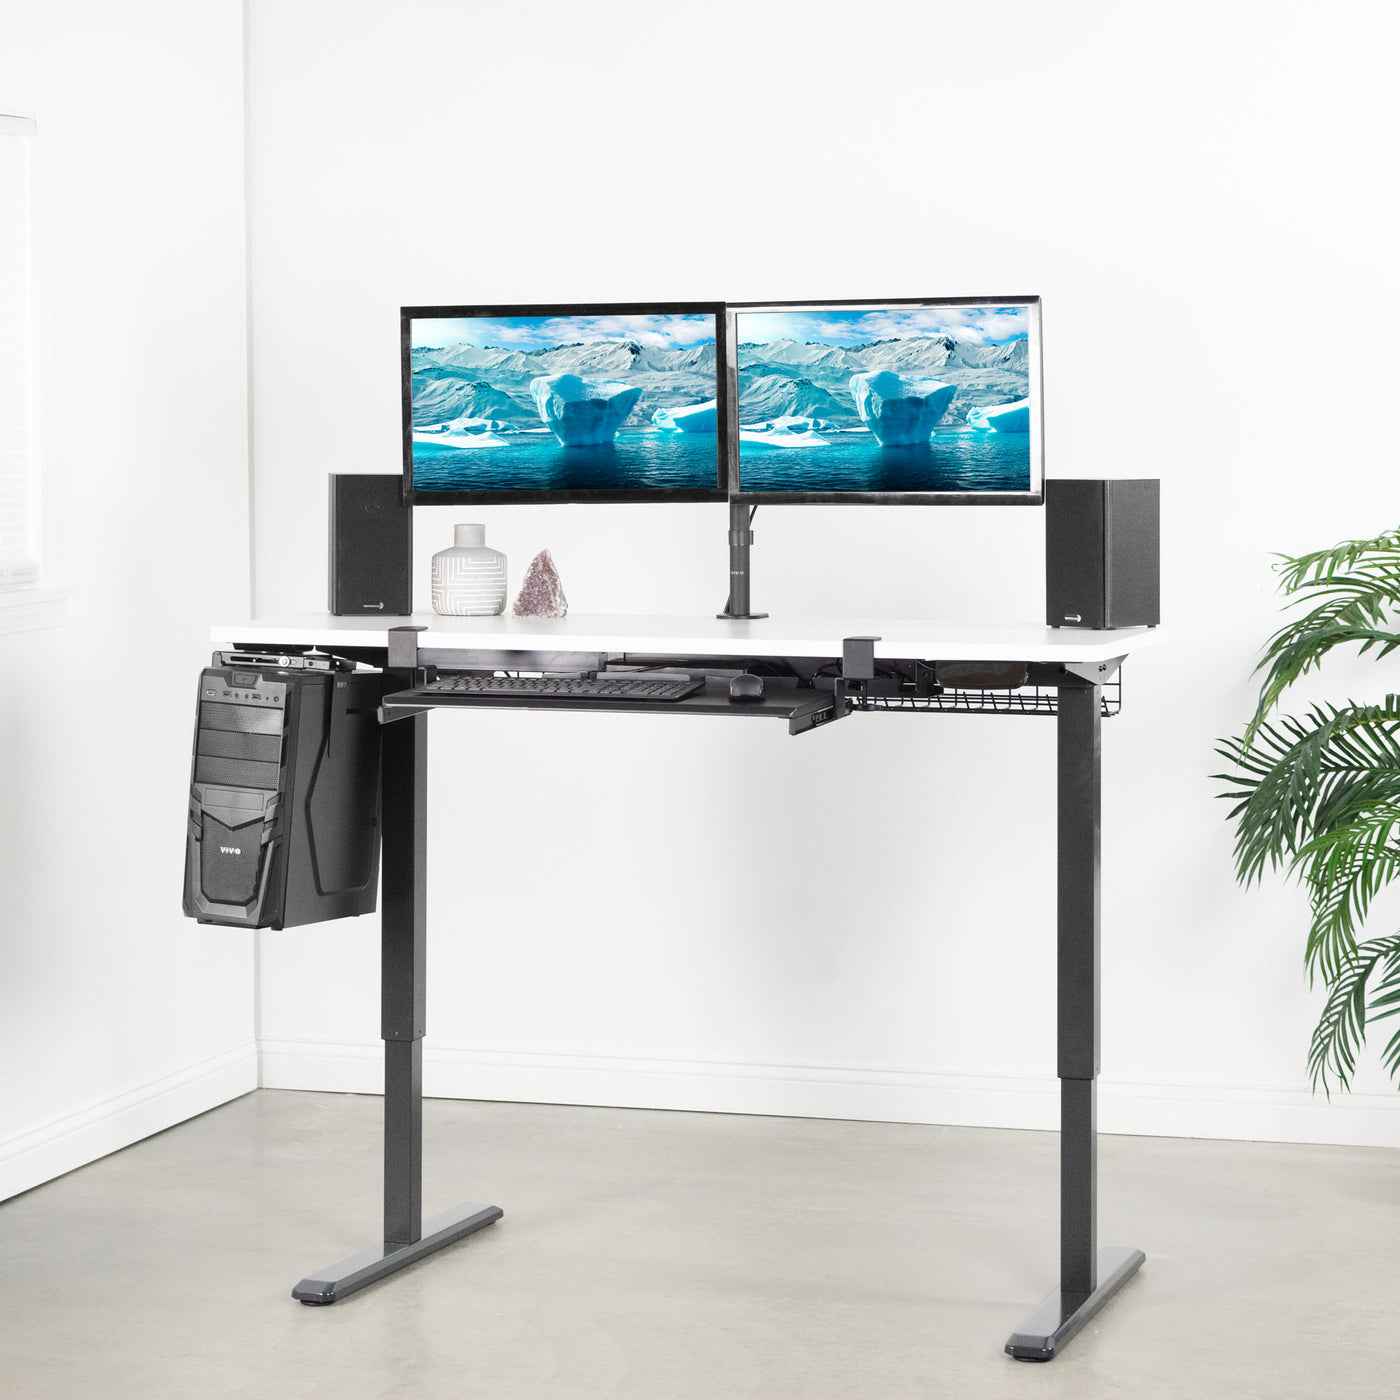 Heavy-duty electric height adjustable desktop workstation for active sit or stand efficient workspace.